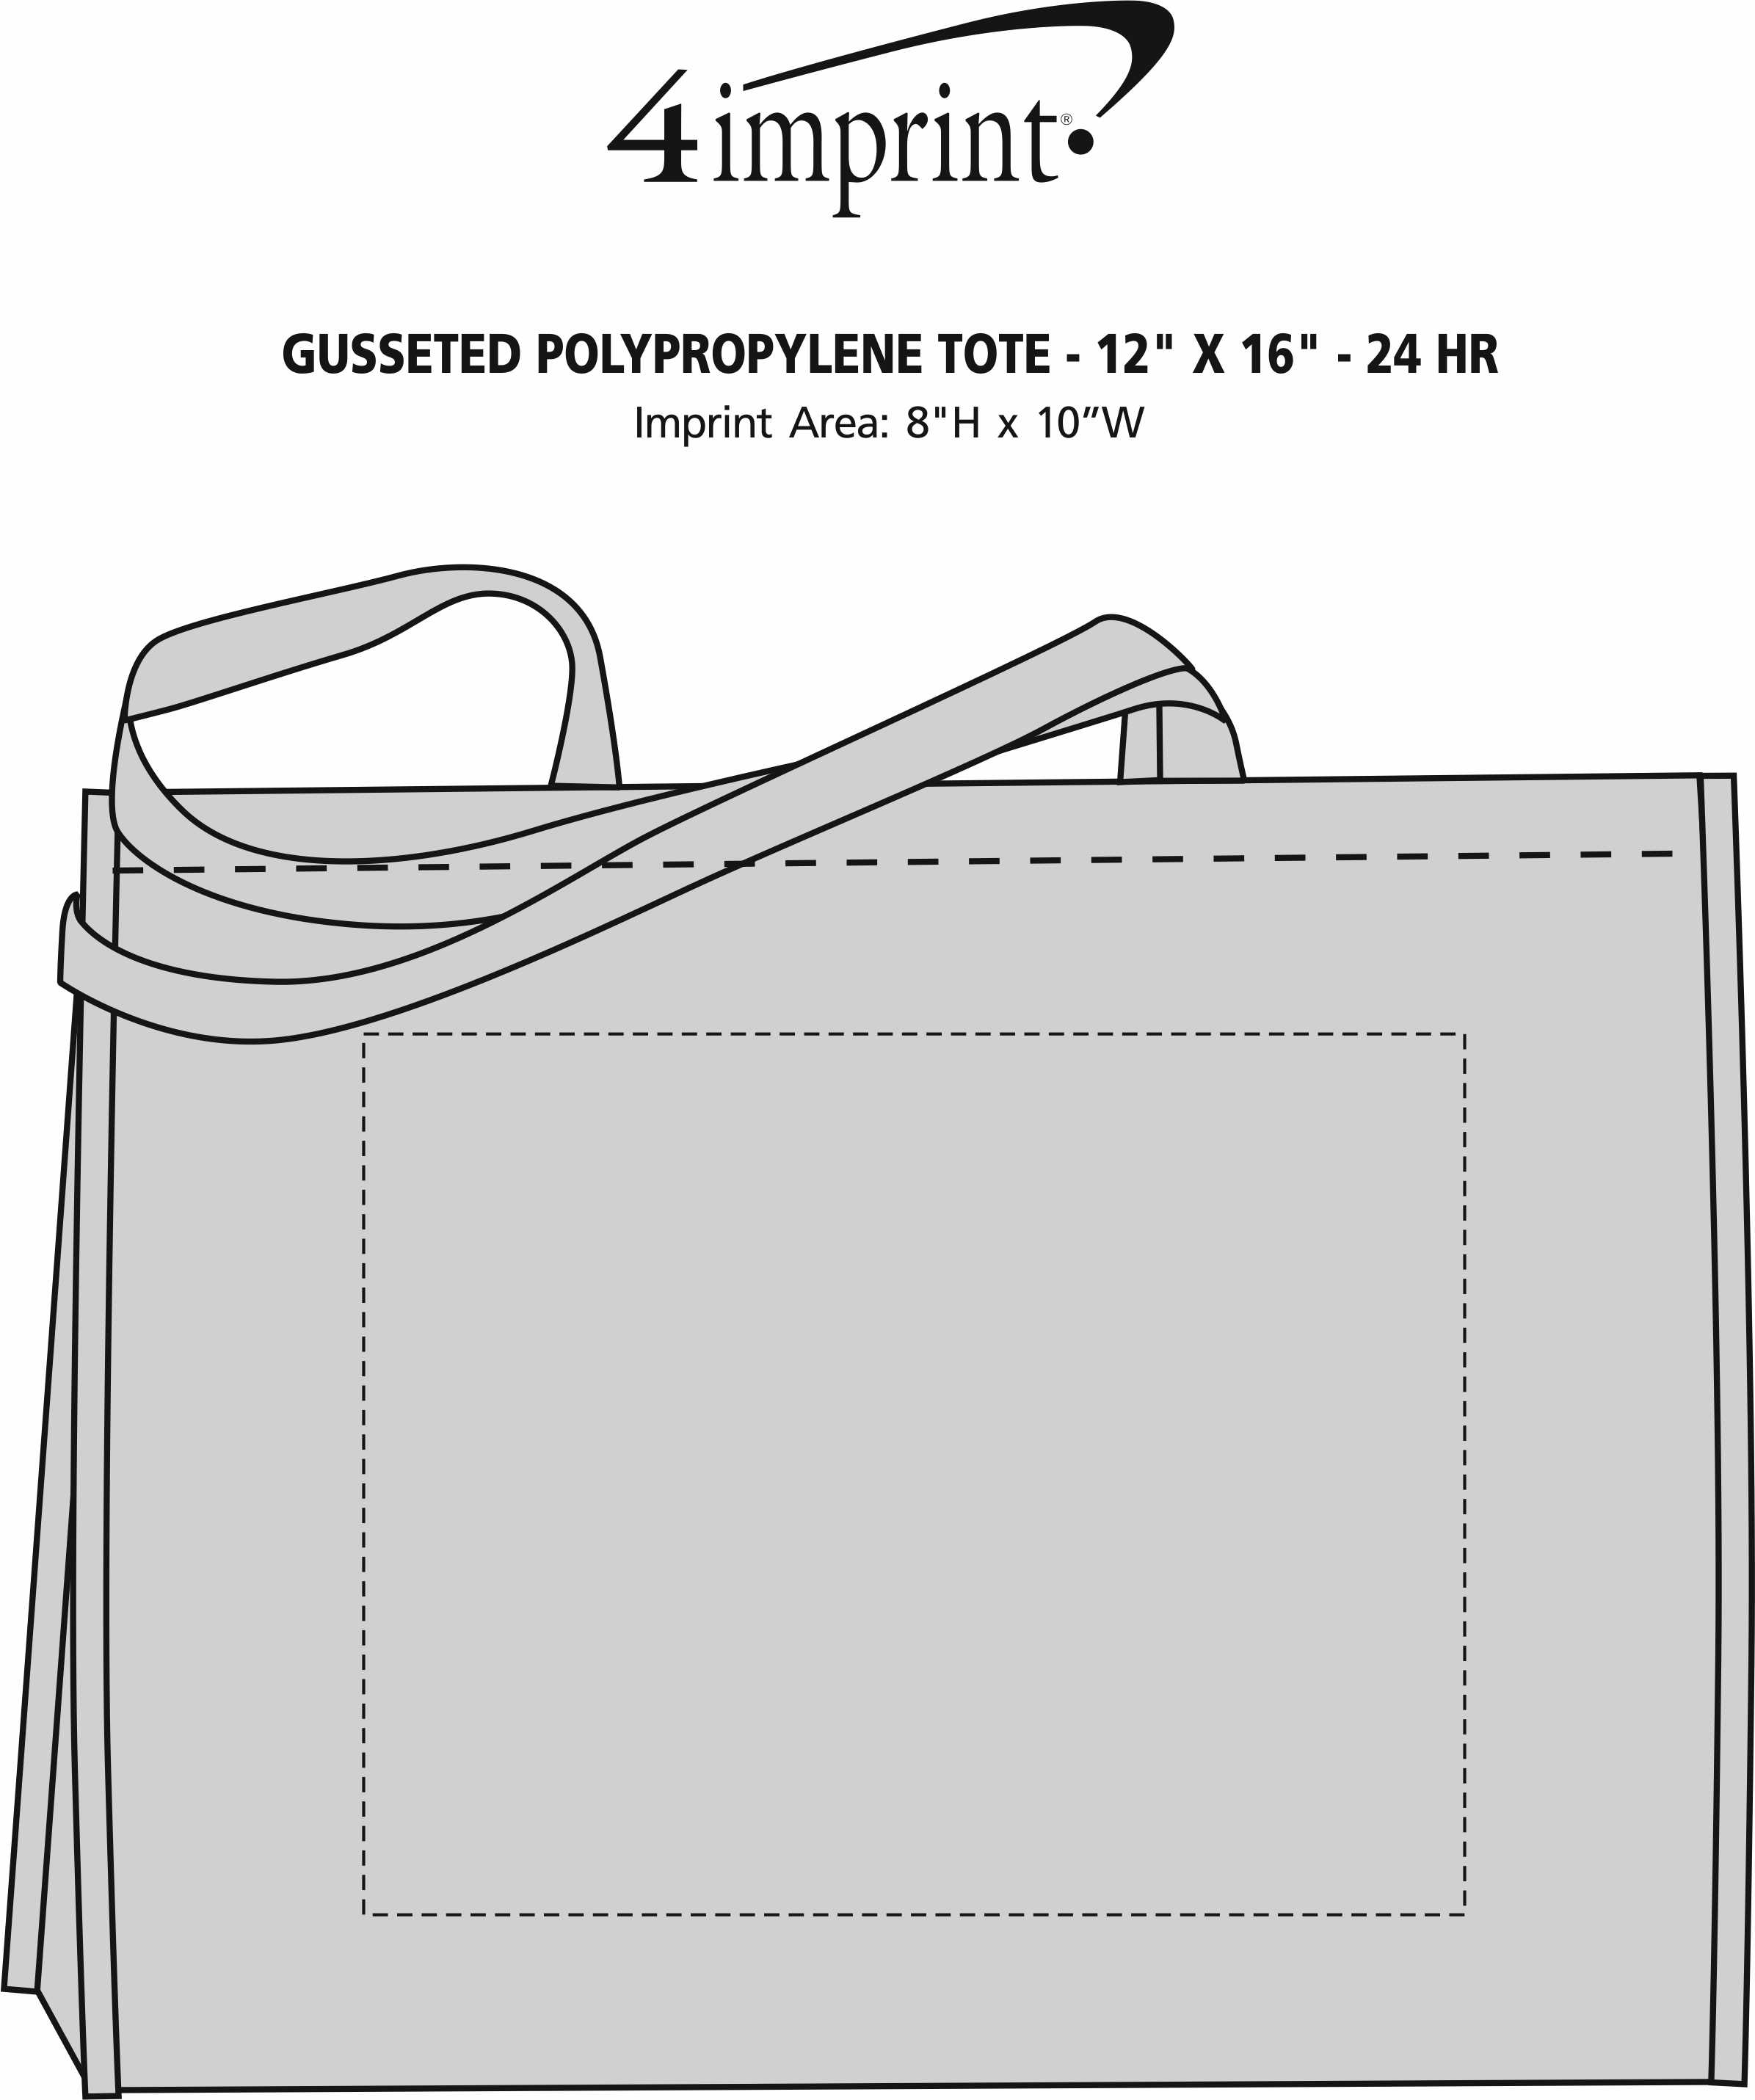 Imprint Area of Gusseted Polypropylene Tote - 12" x 16" - 24 hr